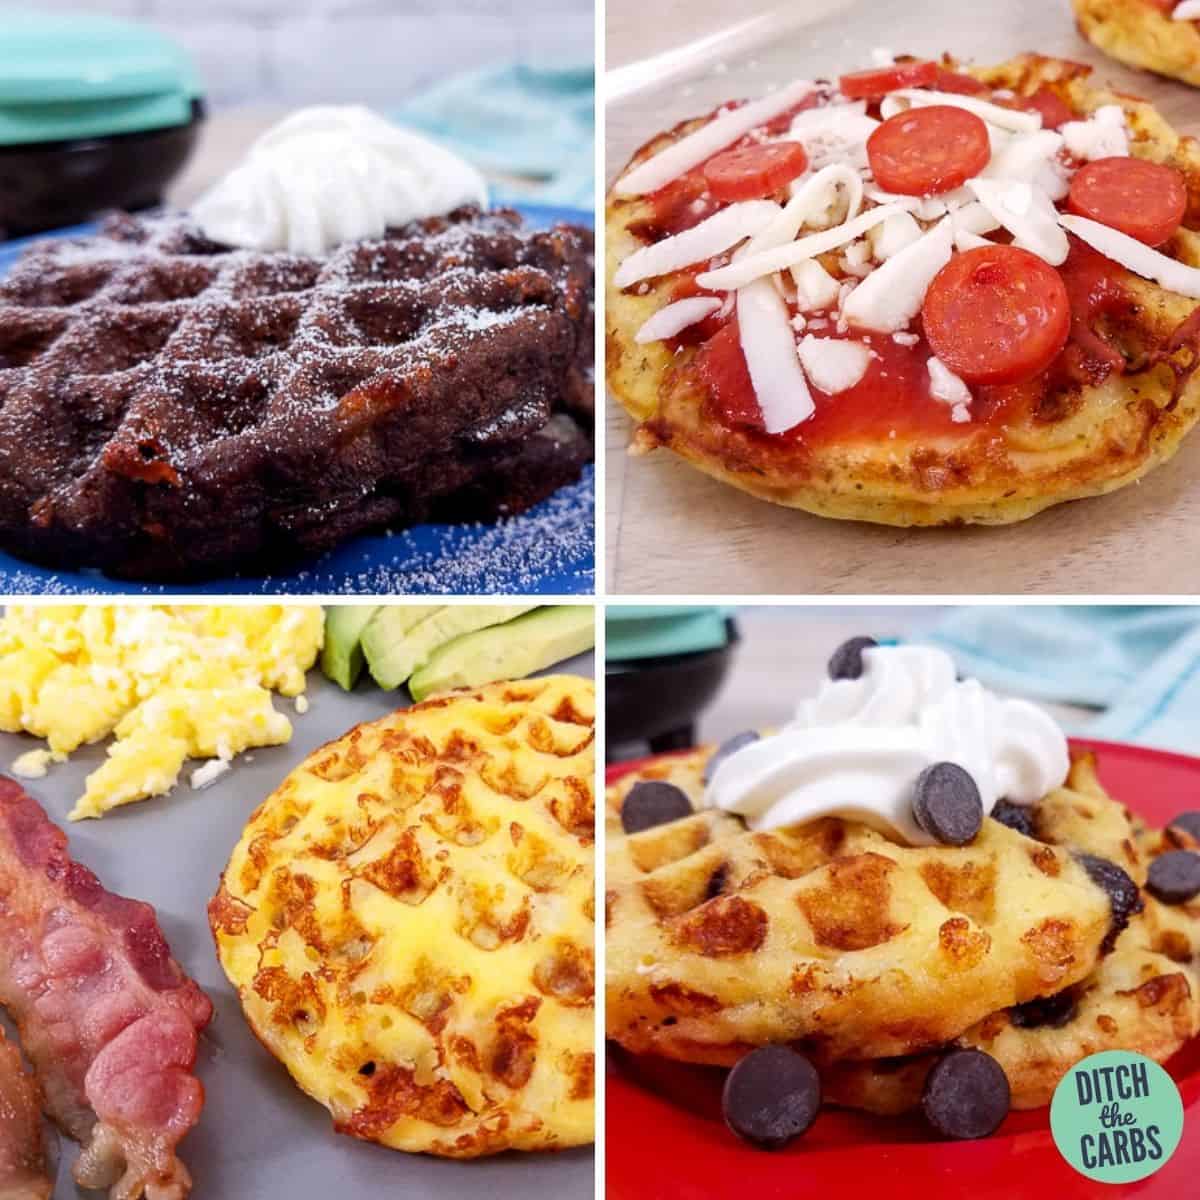 https://thinlicious.com/wp-content/uploads/2019/10/How-To-Make-Chaffles-4-Ways-Free-Cookbook.jpg